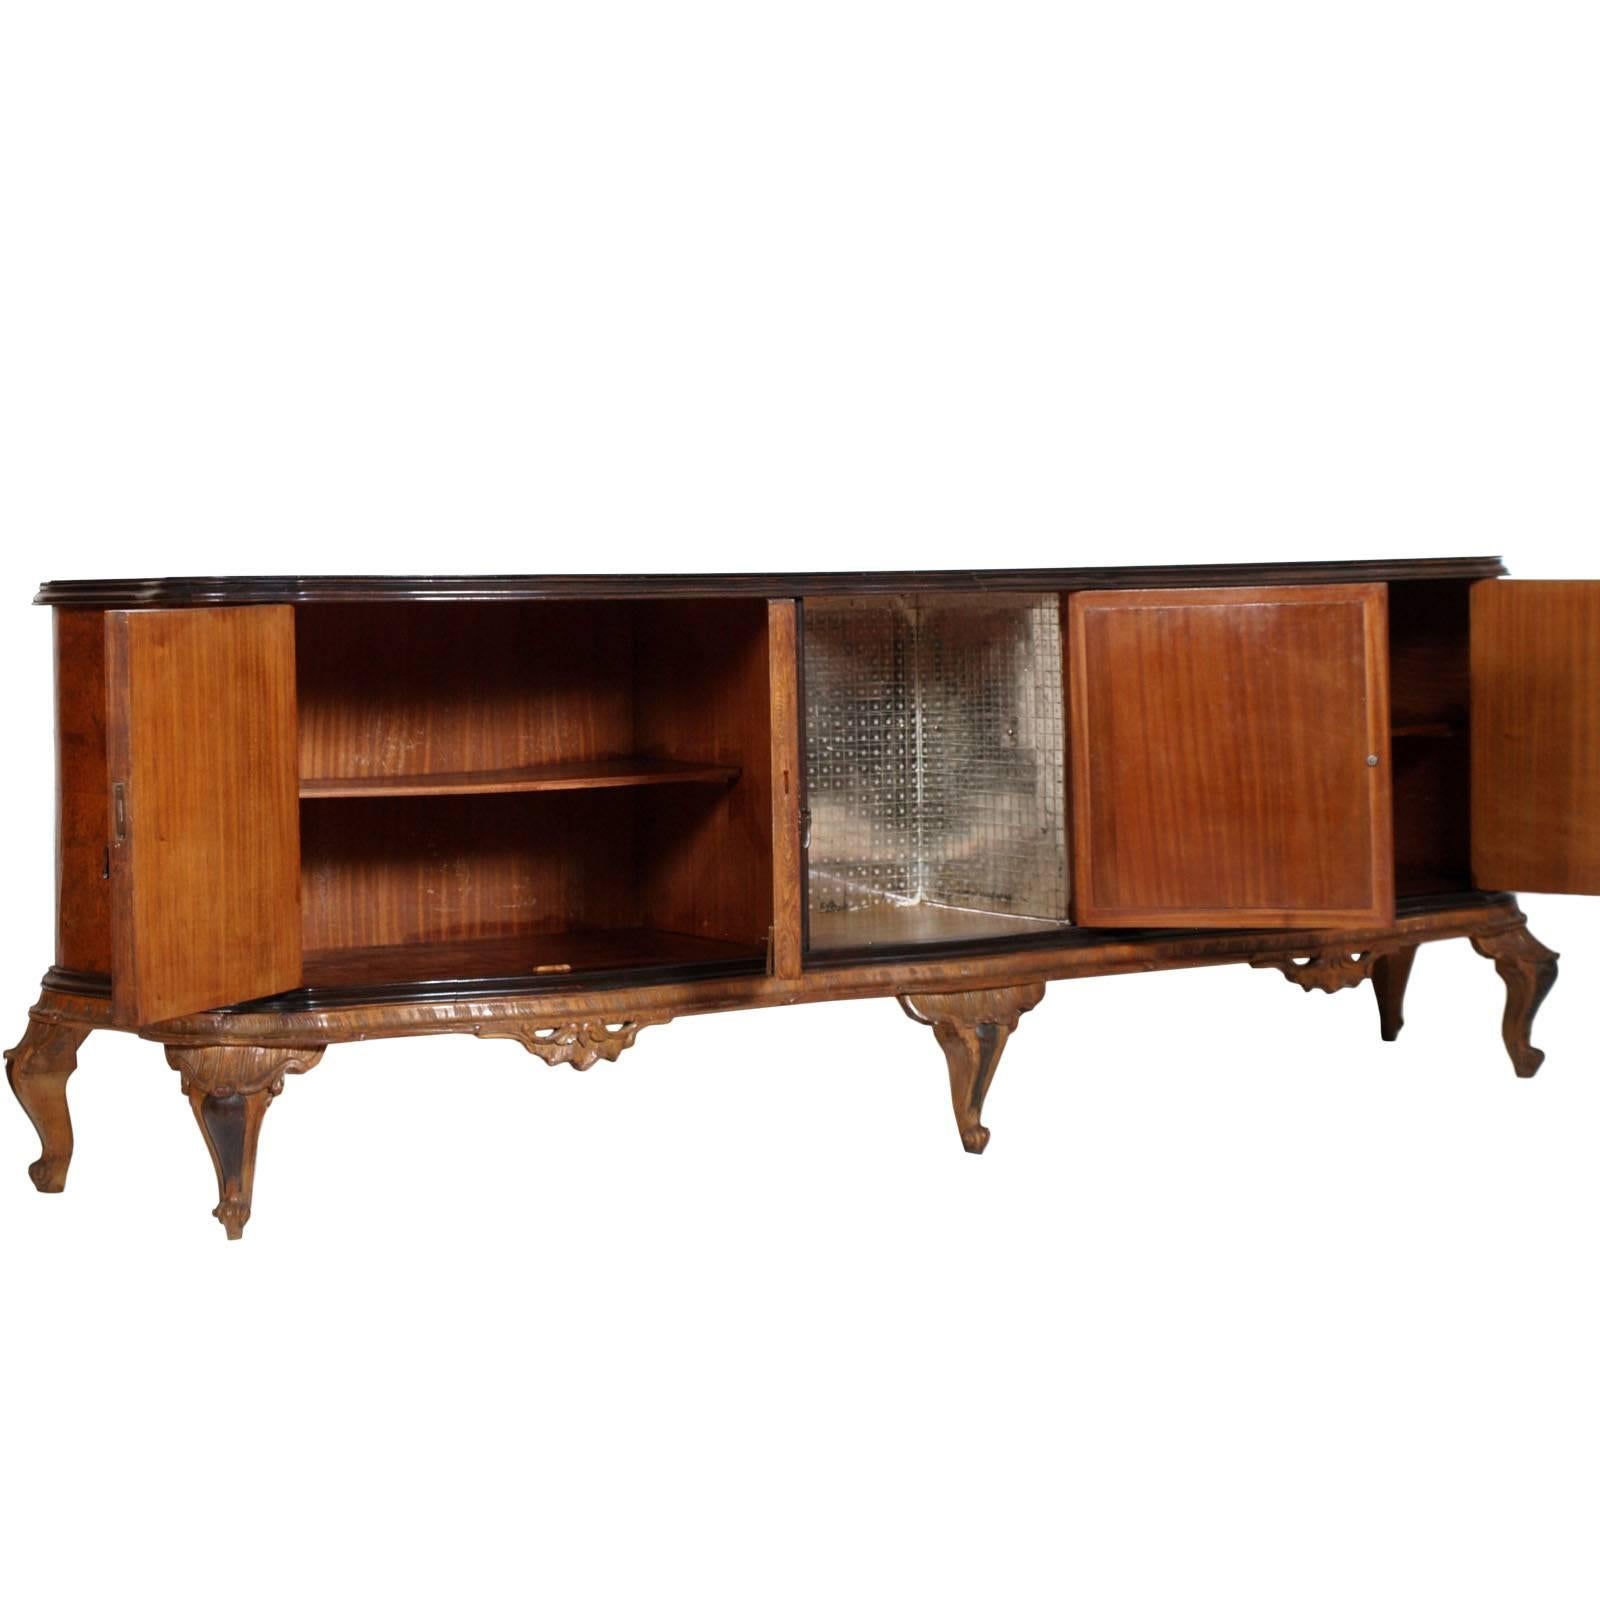 Burl Large Venetian Baroque Chippendale Credenza with Dry Bar and Golden Leaf Mirror For Sale